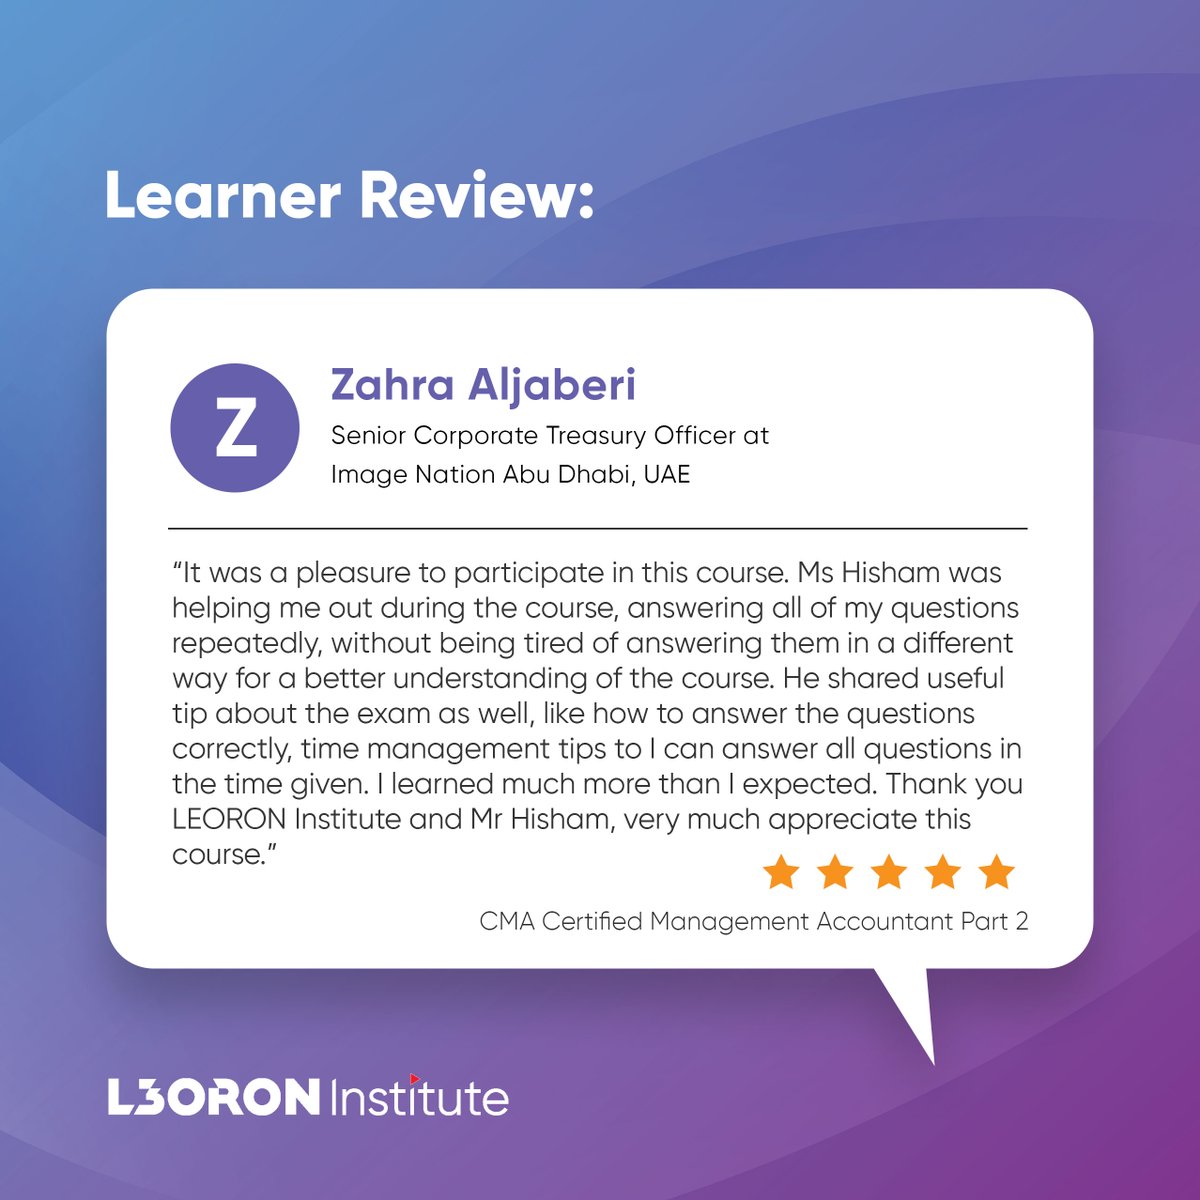 A stellar review from our delegate Zahra Aljaberi on the CMA course!

Elevate your finance career with the Certified Management Accountant (CMA) qualification.

Learn more: shorturl.at/AEGZ6

#LEORONInstitute #testimonial #LearnersReview #FinanceandAccounting